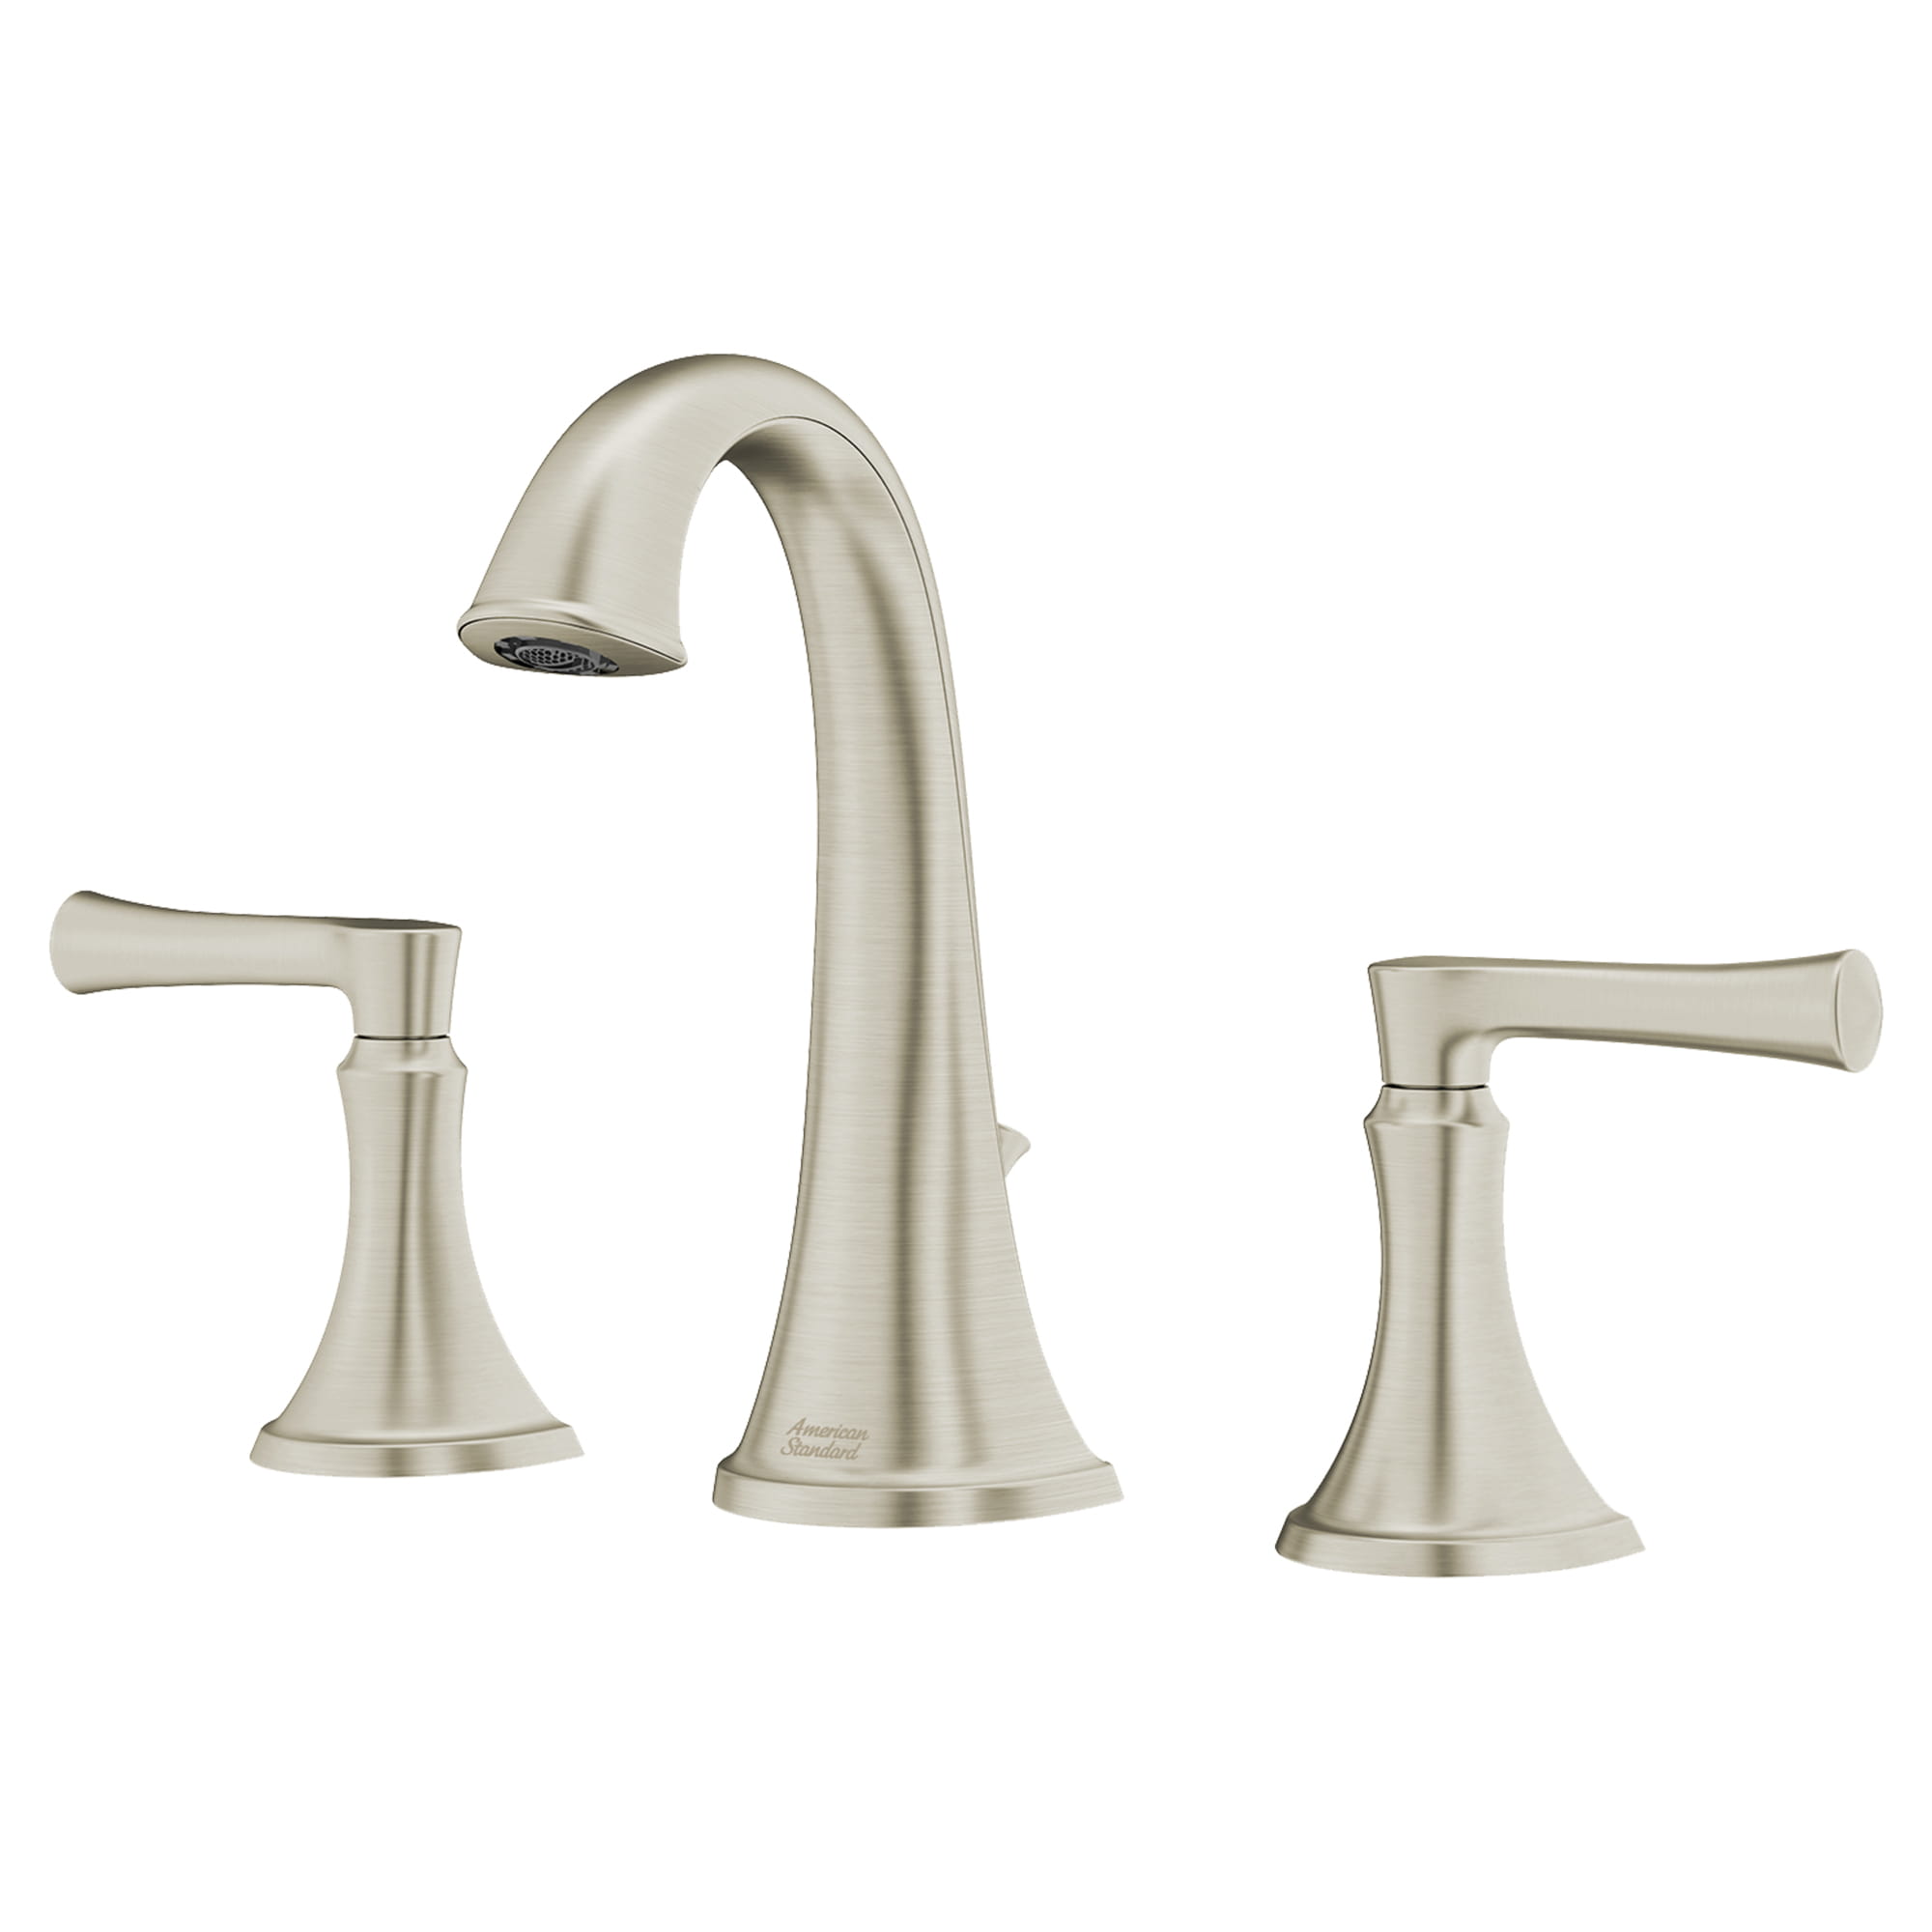 Estate 8 Inch Widespread 2 Handle Bathroom Faucet 12 gmp 45 L min With Lever Handles   BRUSHED NICKEL